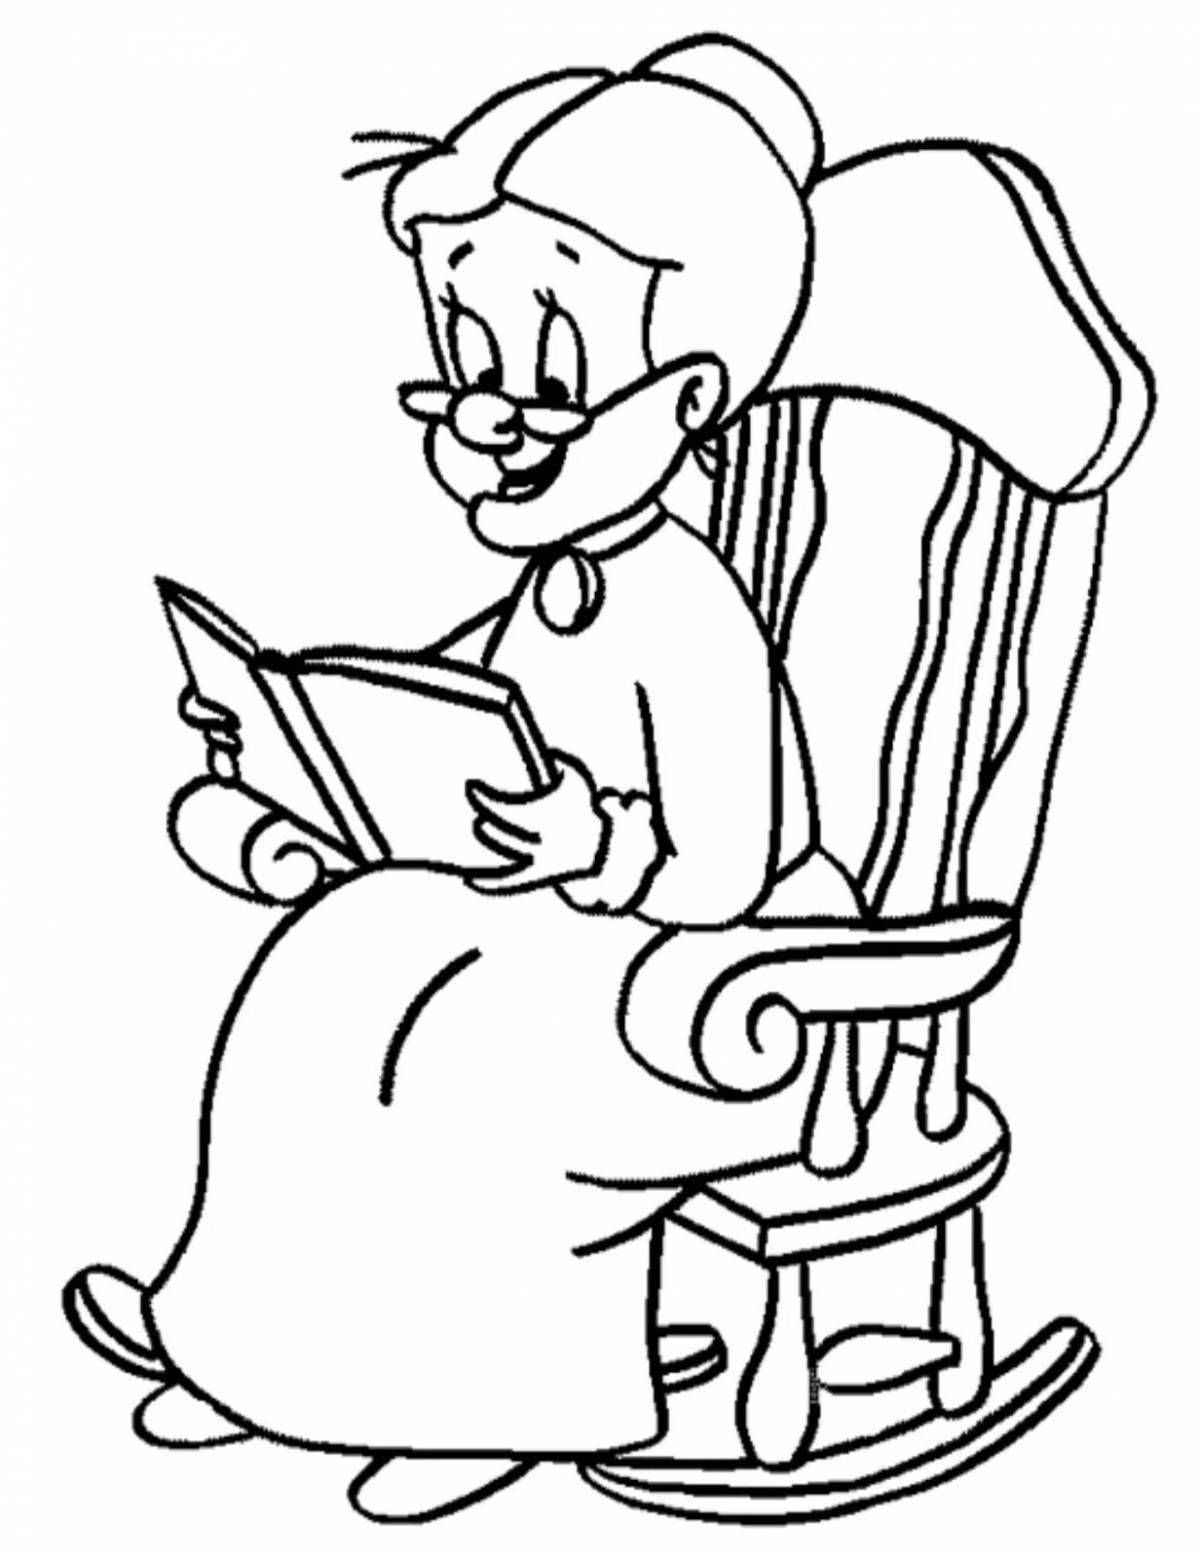 Gorgeous grandma coloring page